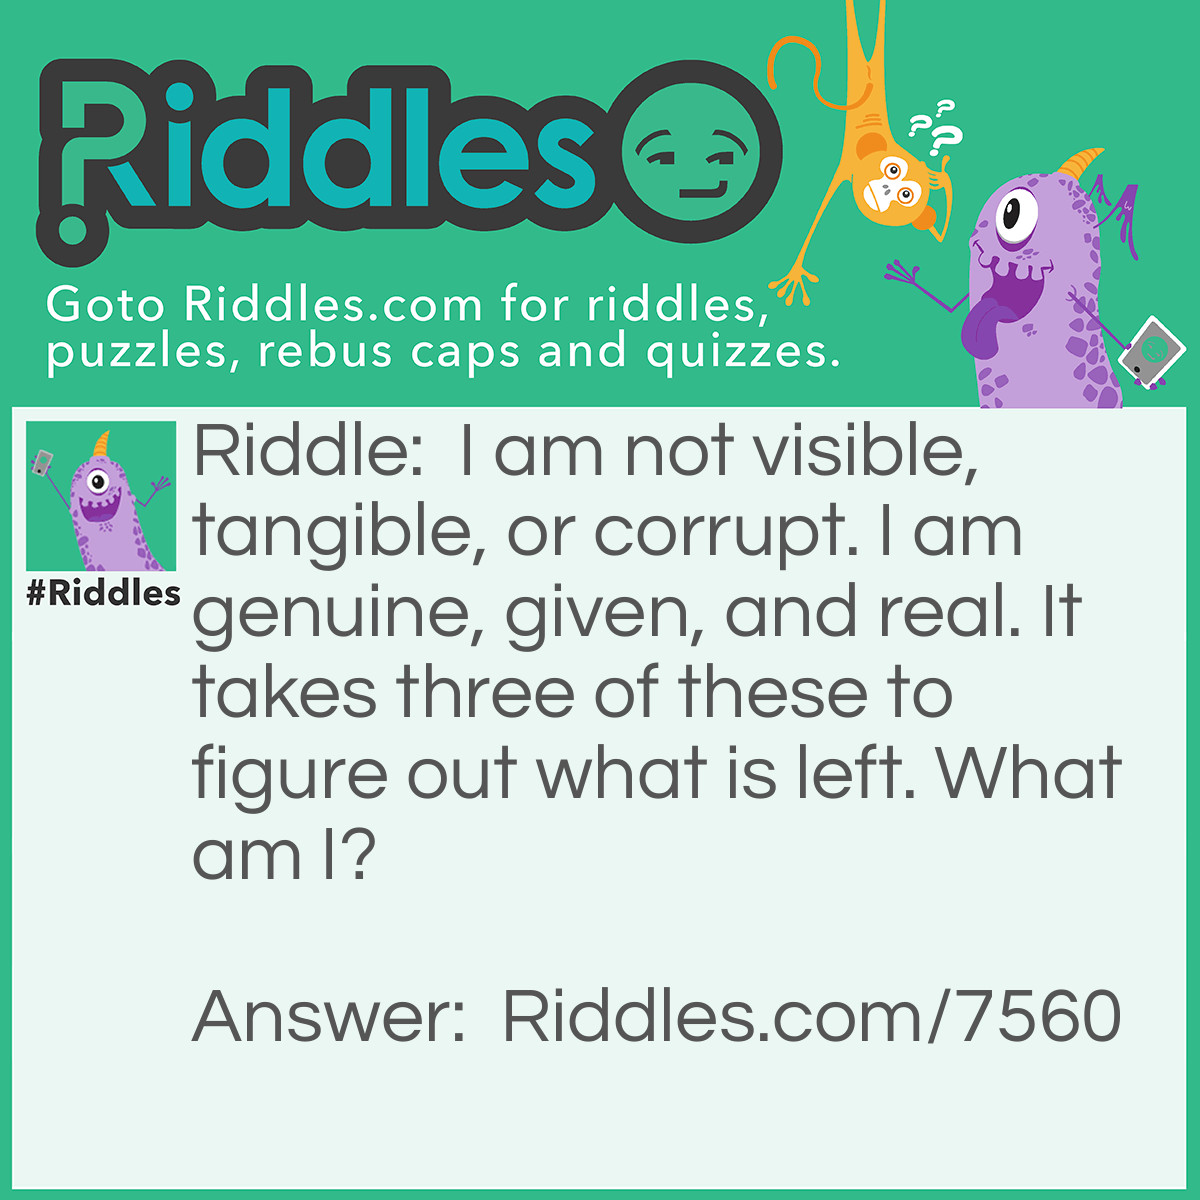 Riddle: I am not visible, tangible, or corrupt. I am genuine, given, and real. It takes three of these to figure out what is left. What am I? Answer: Right.